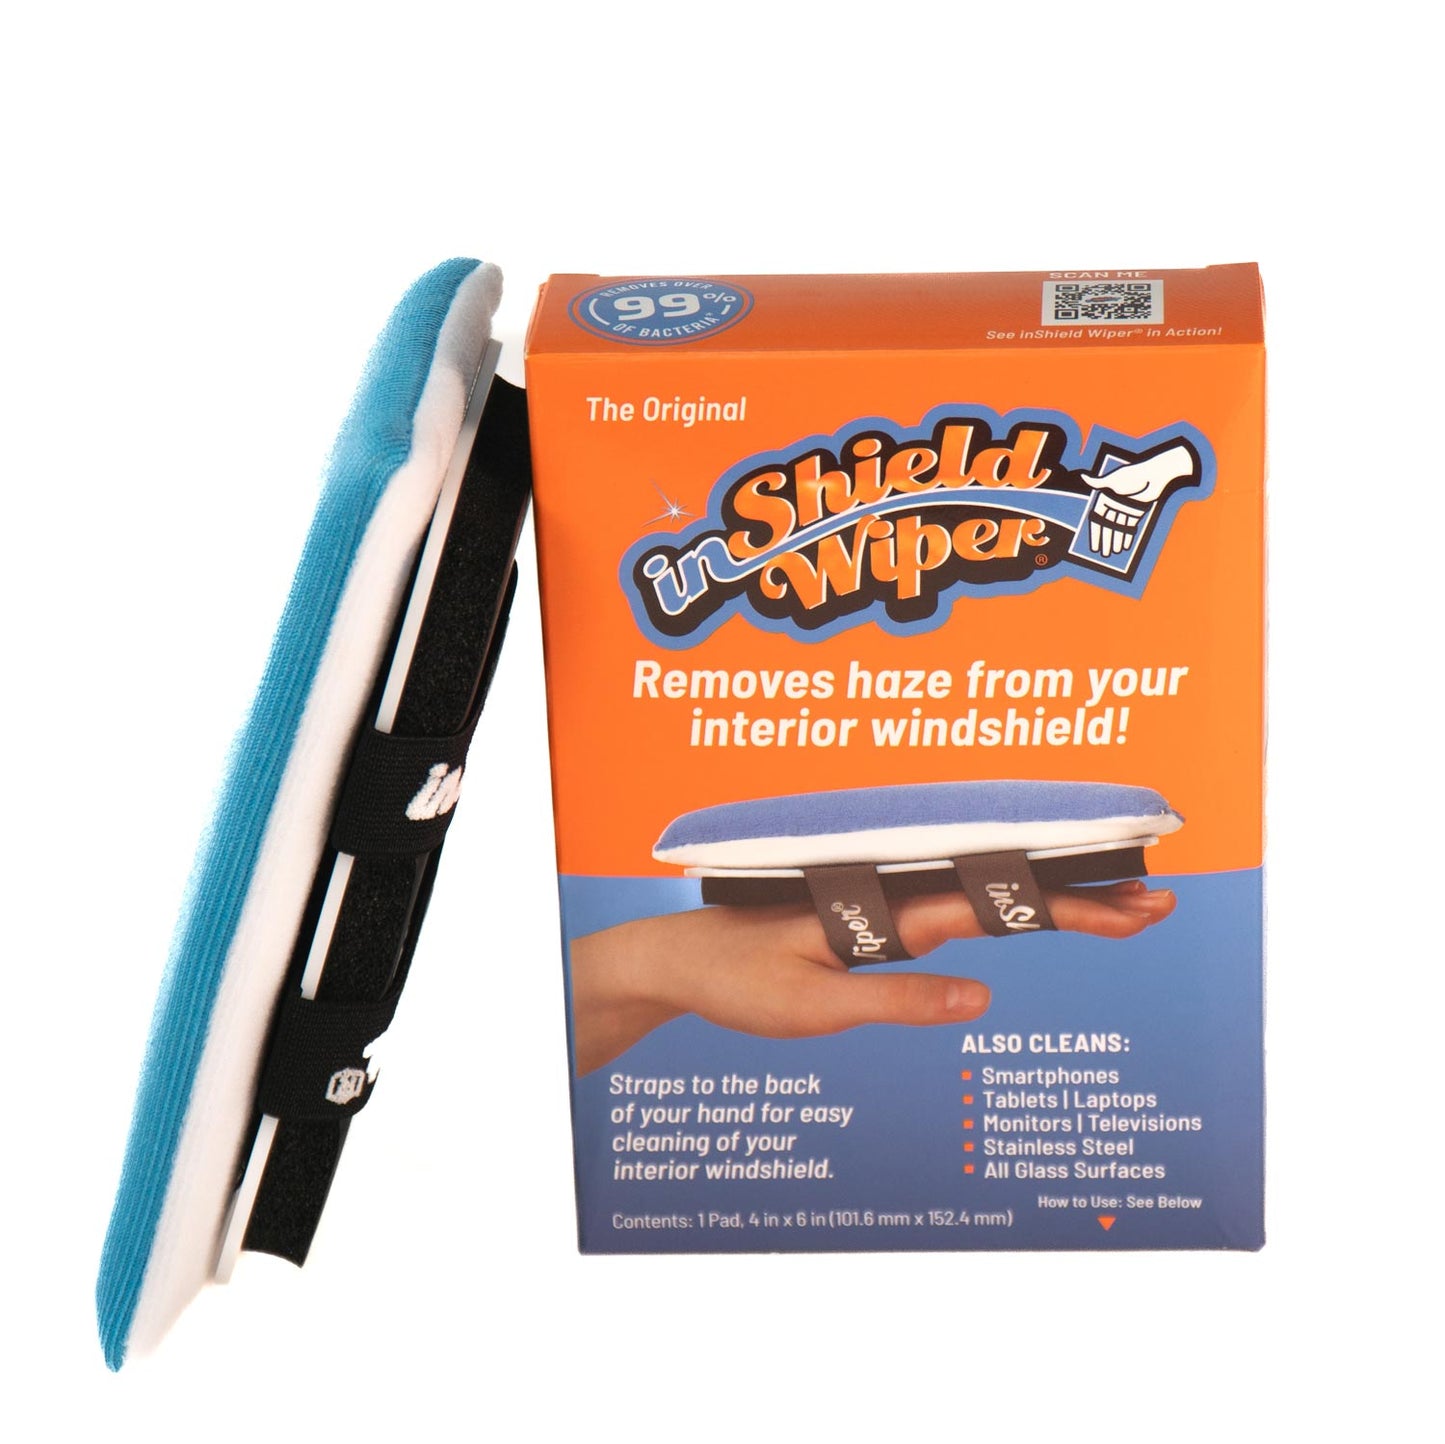 inShield Wiper, clean the inside of your windshield with ease